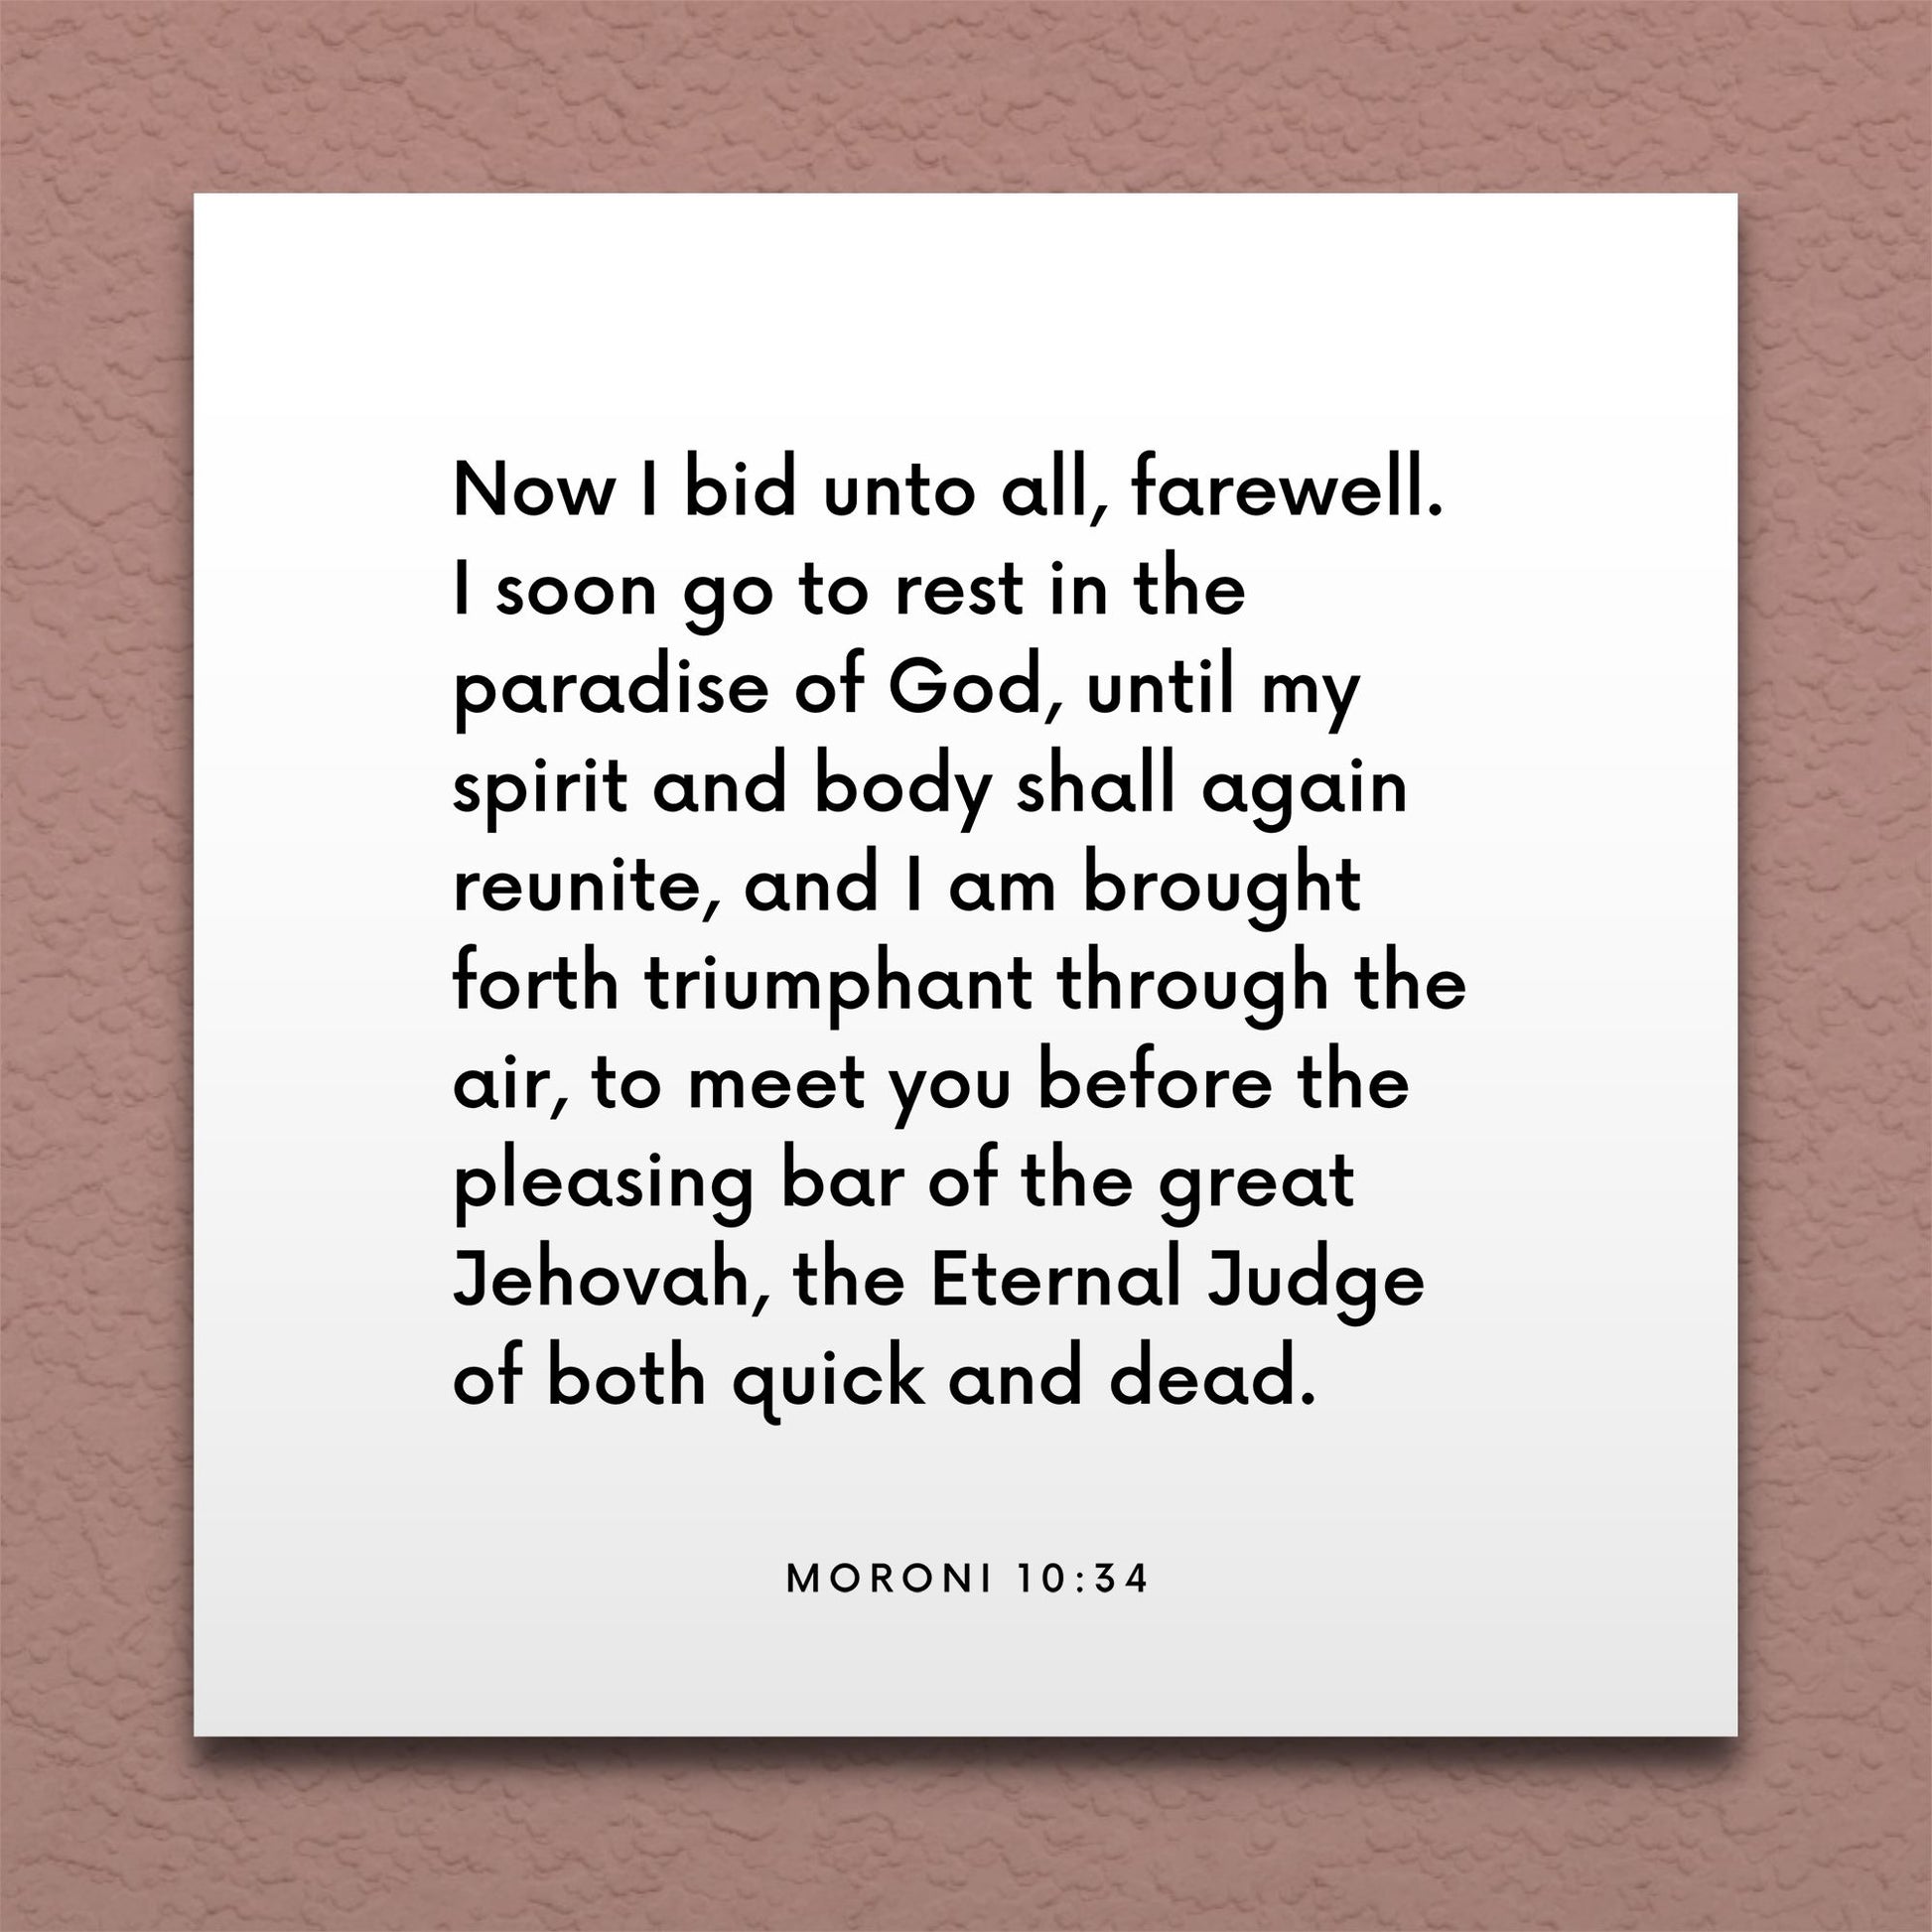 Wall-mounted scripture tile for Moroni 10:34 - "I soon go to rest in the paradise of God"